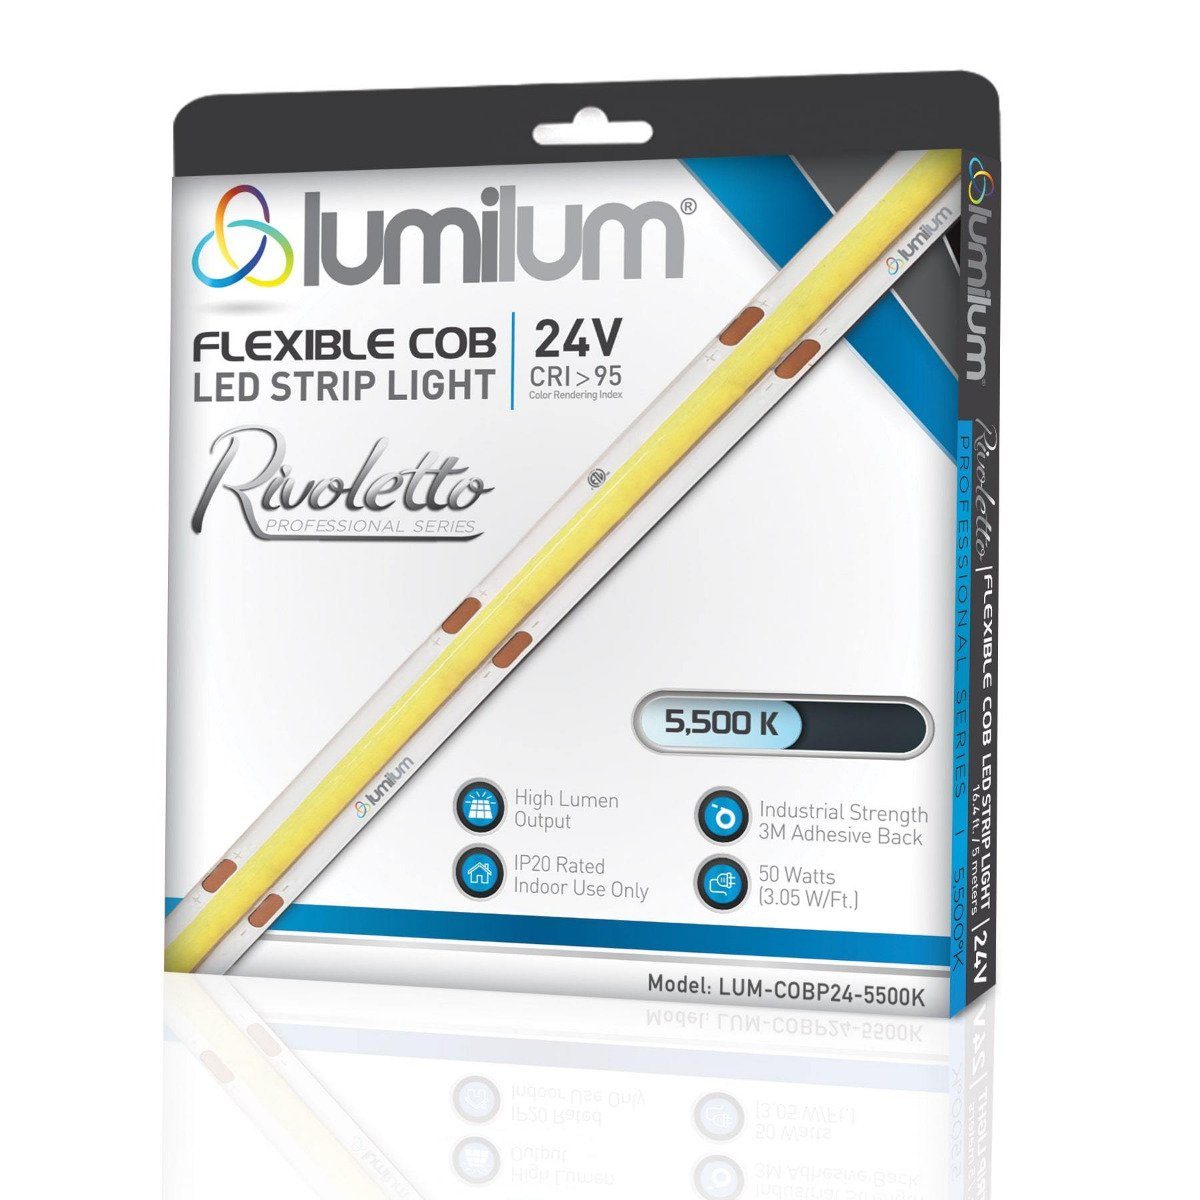 Lumilum 5500k led strip light packaging with blue and white accents showing led strip with yellow line